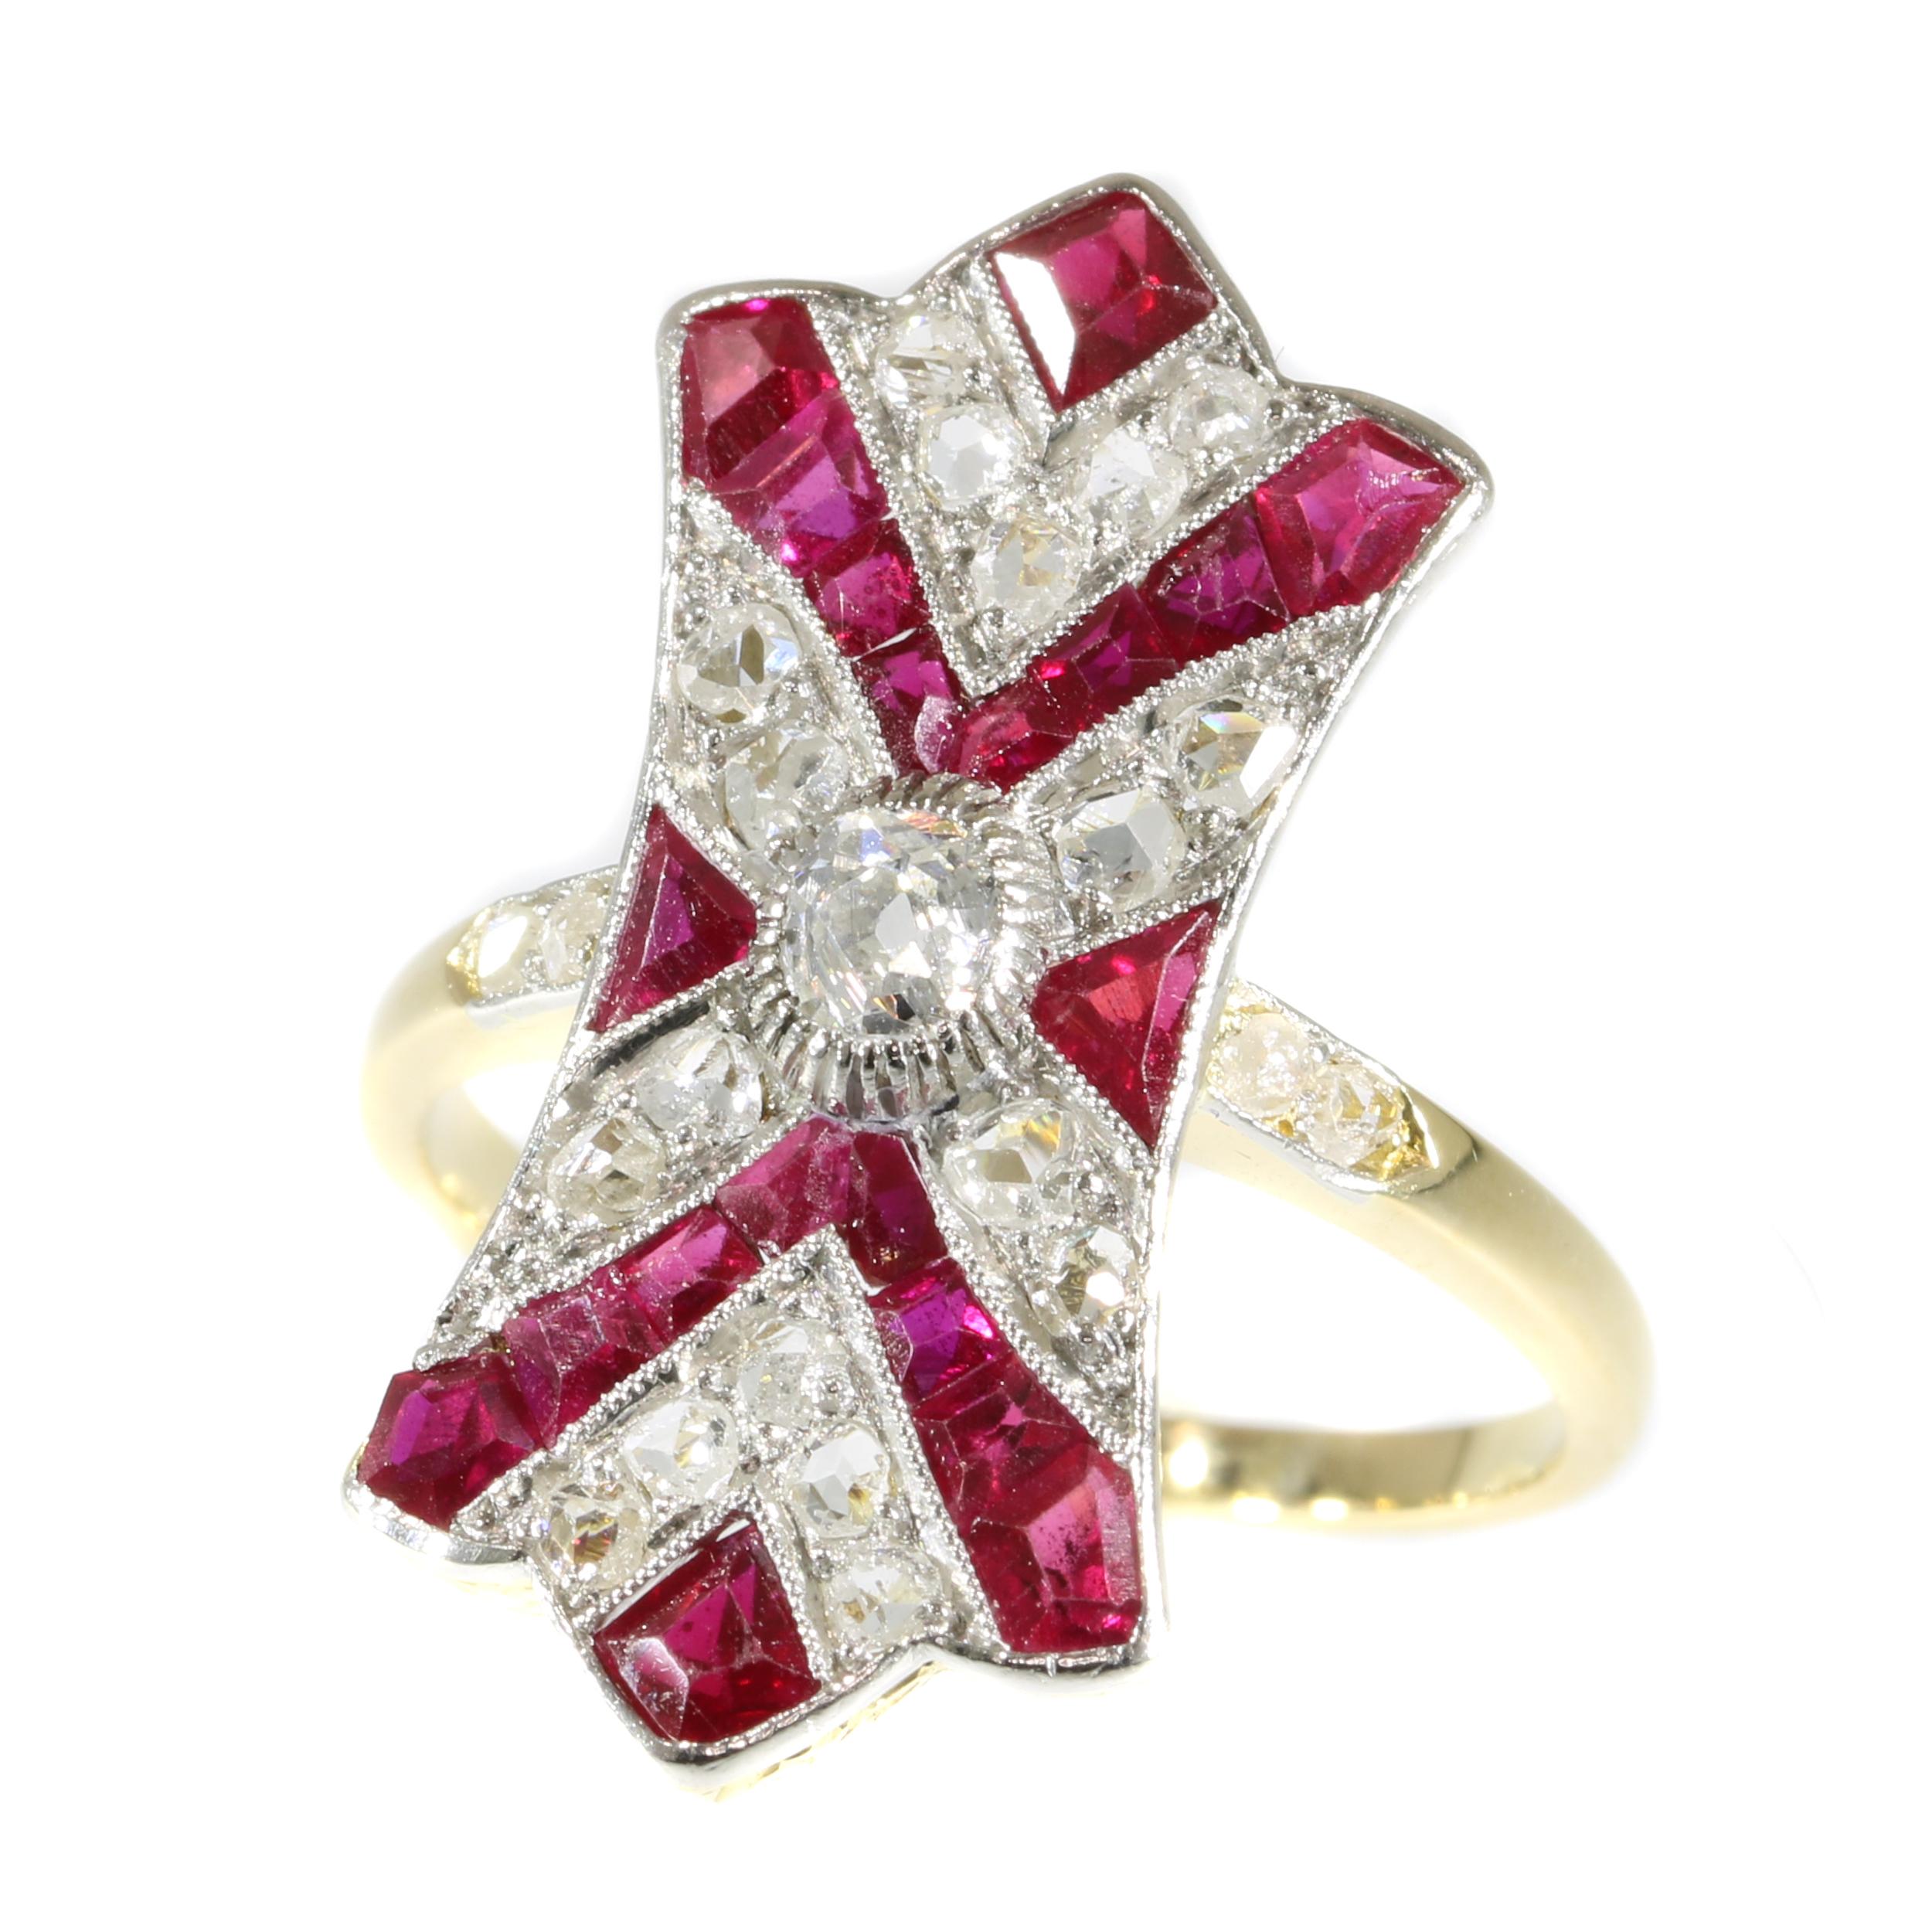 Decorative Vintage Art Deco Ruby and Diamond Engagement Ring